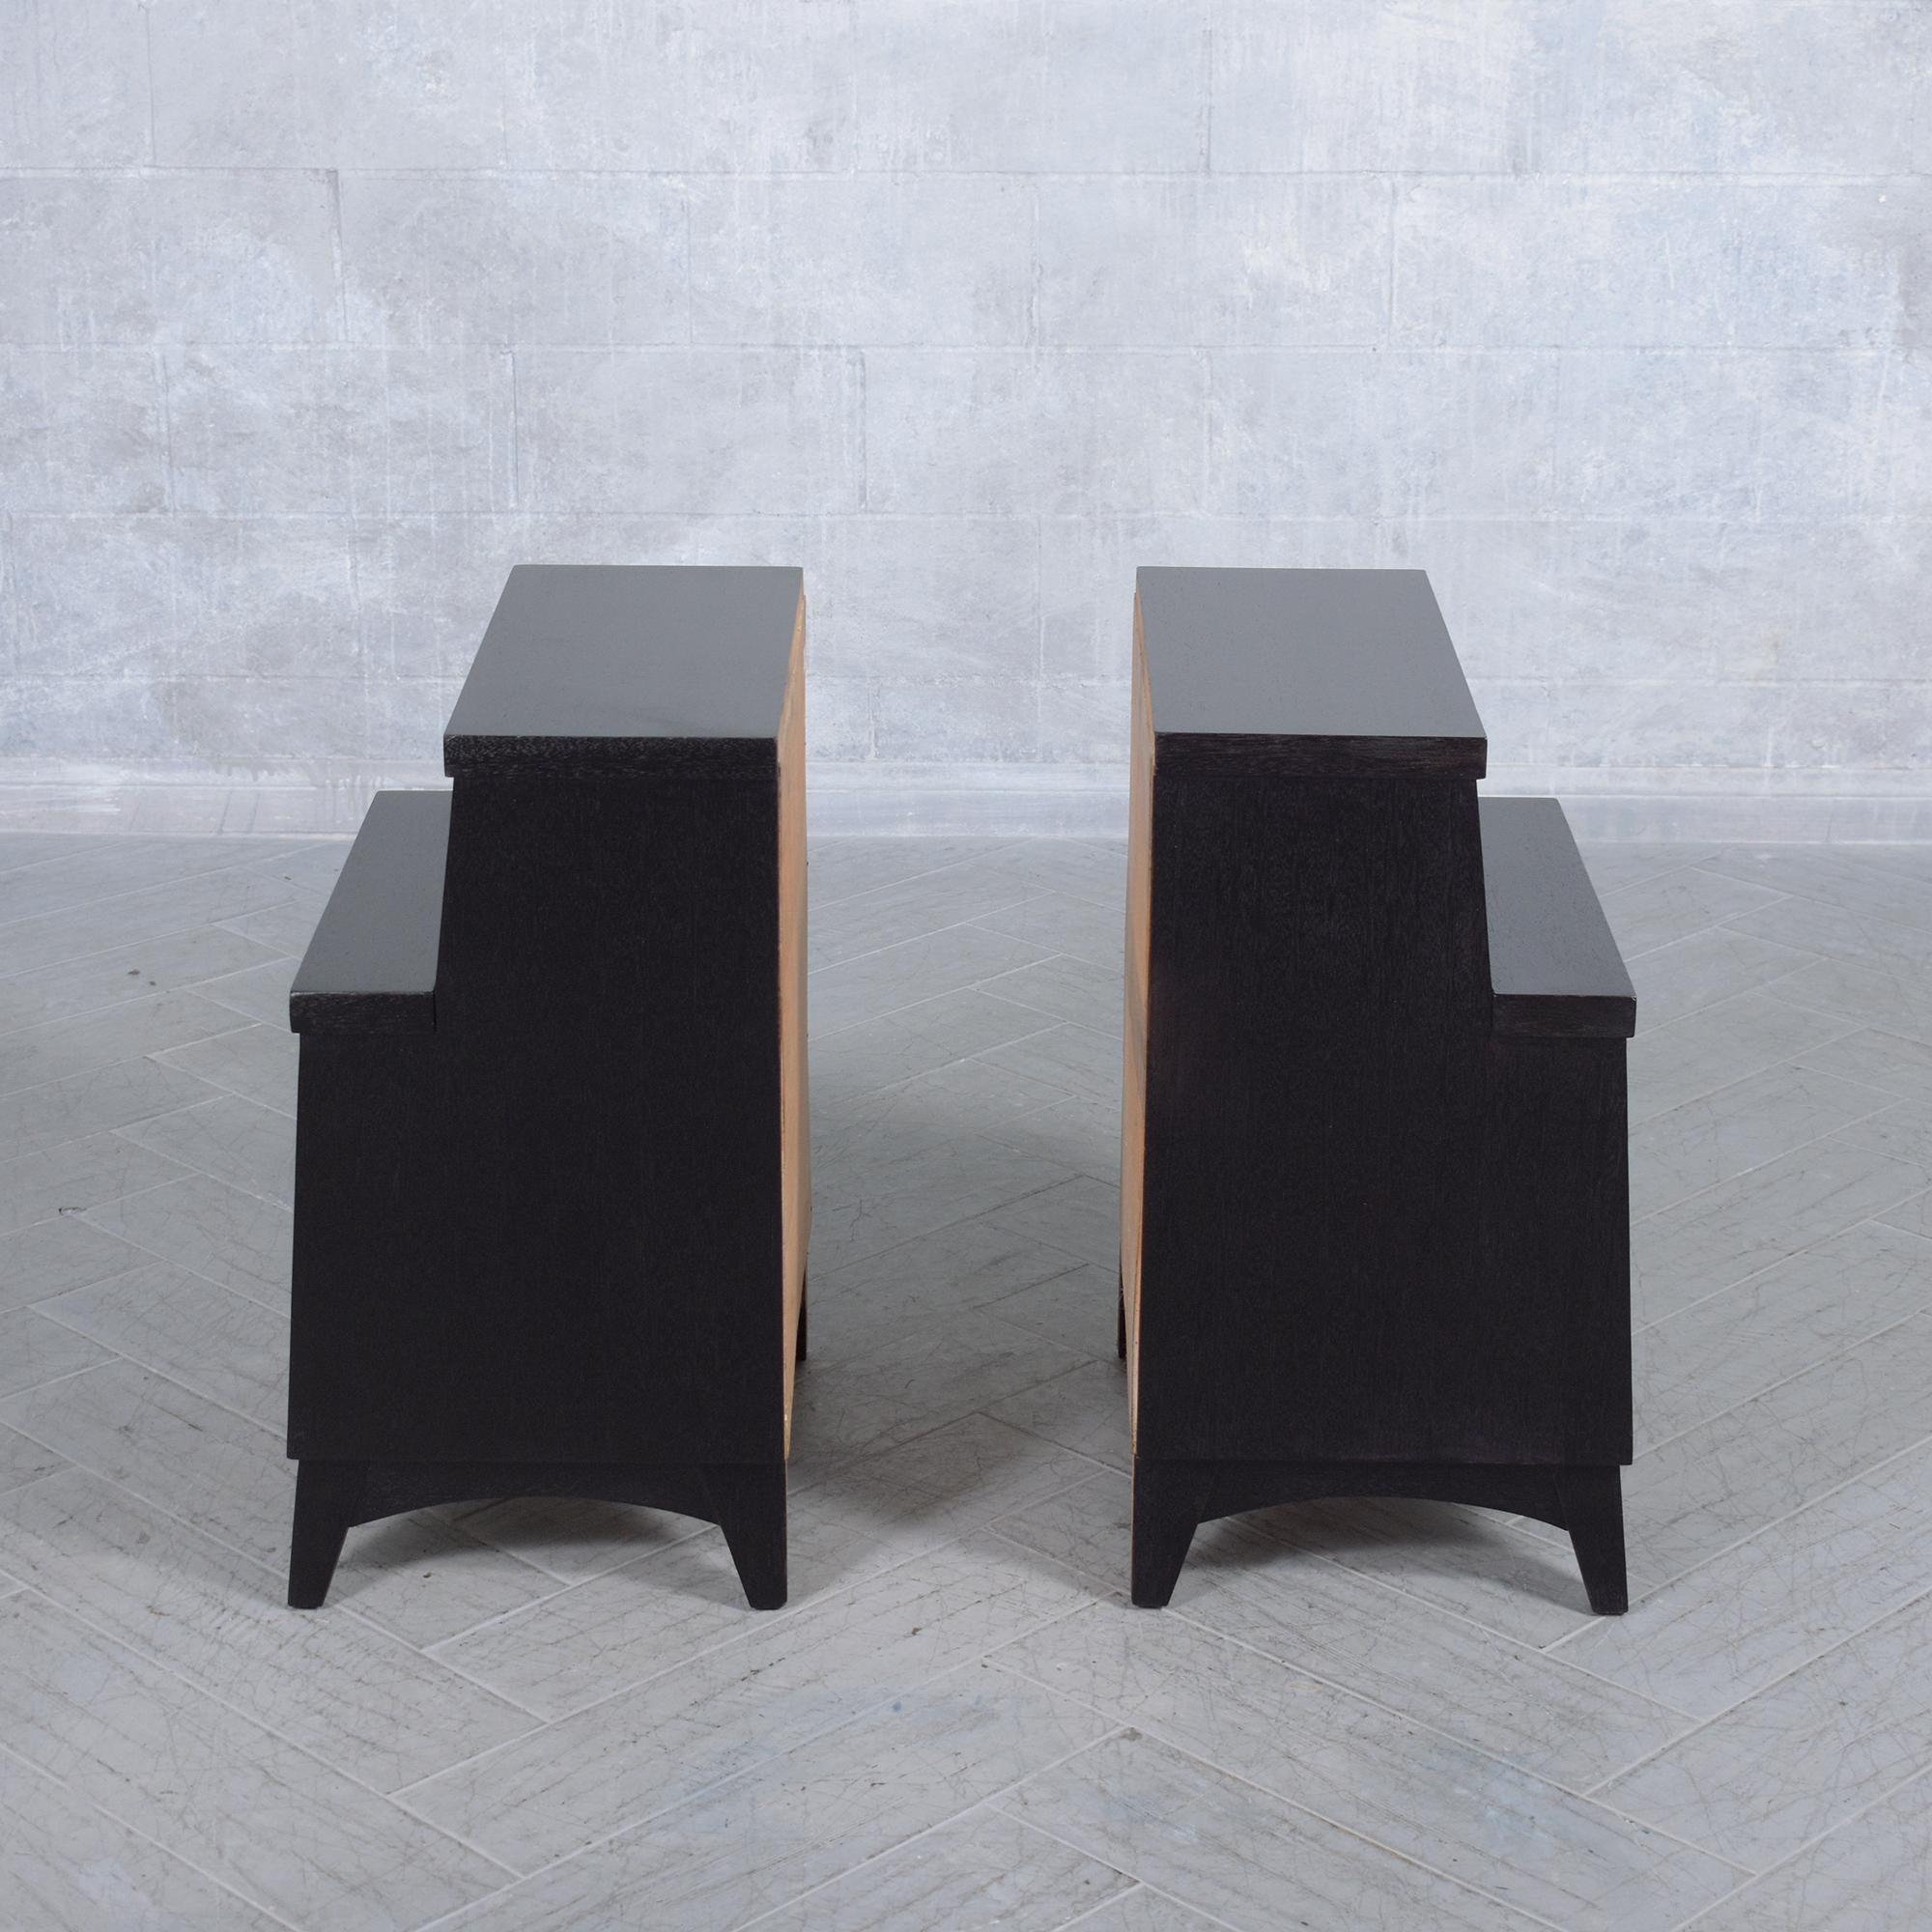 Restored Mid-Century Modern Nightstands with Ebonized Finish and Chrome Hardware For Sale 6